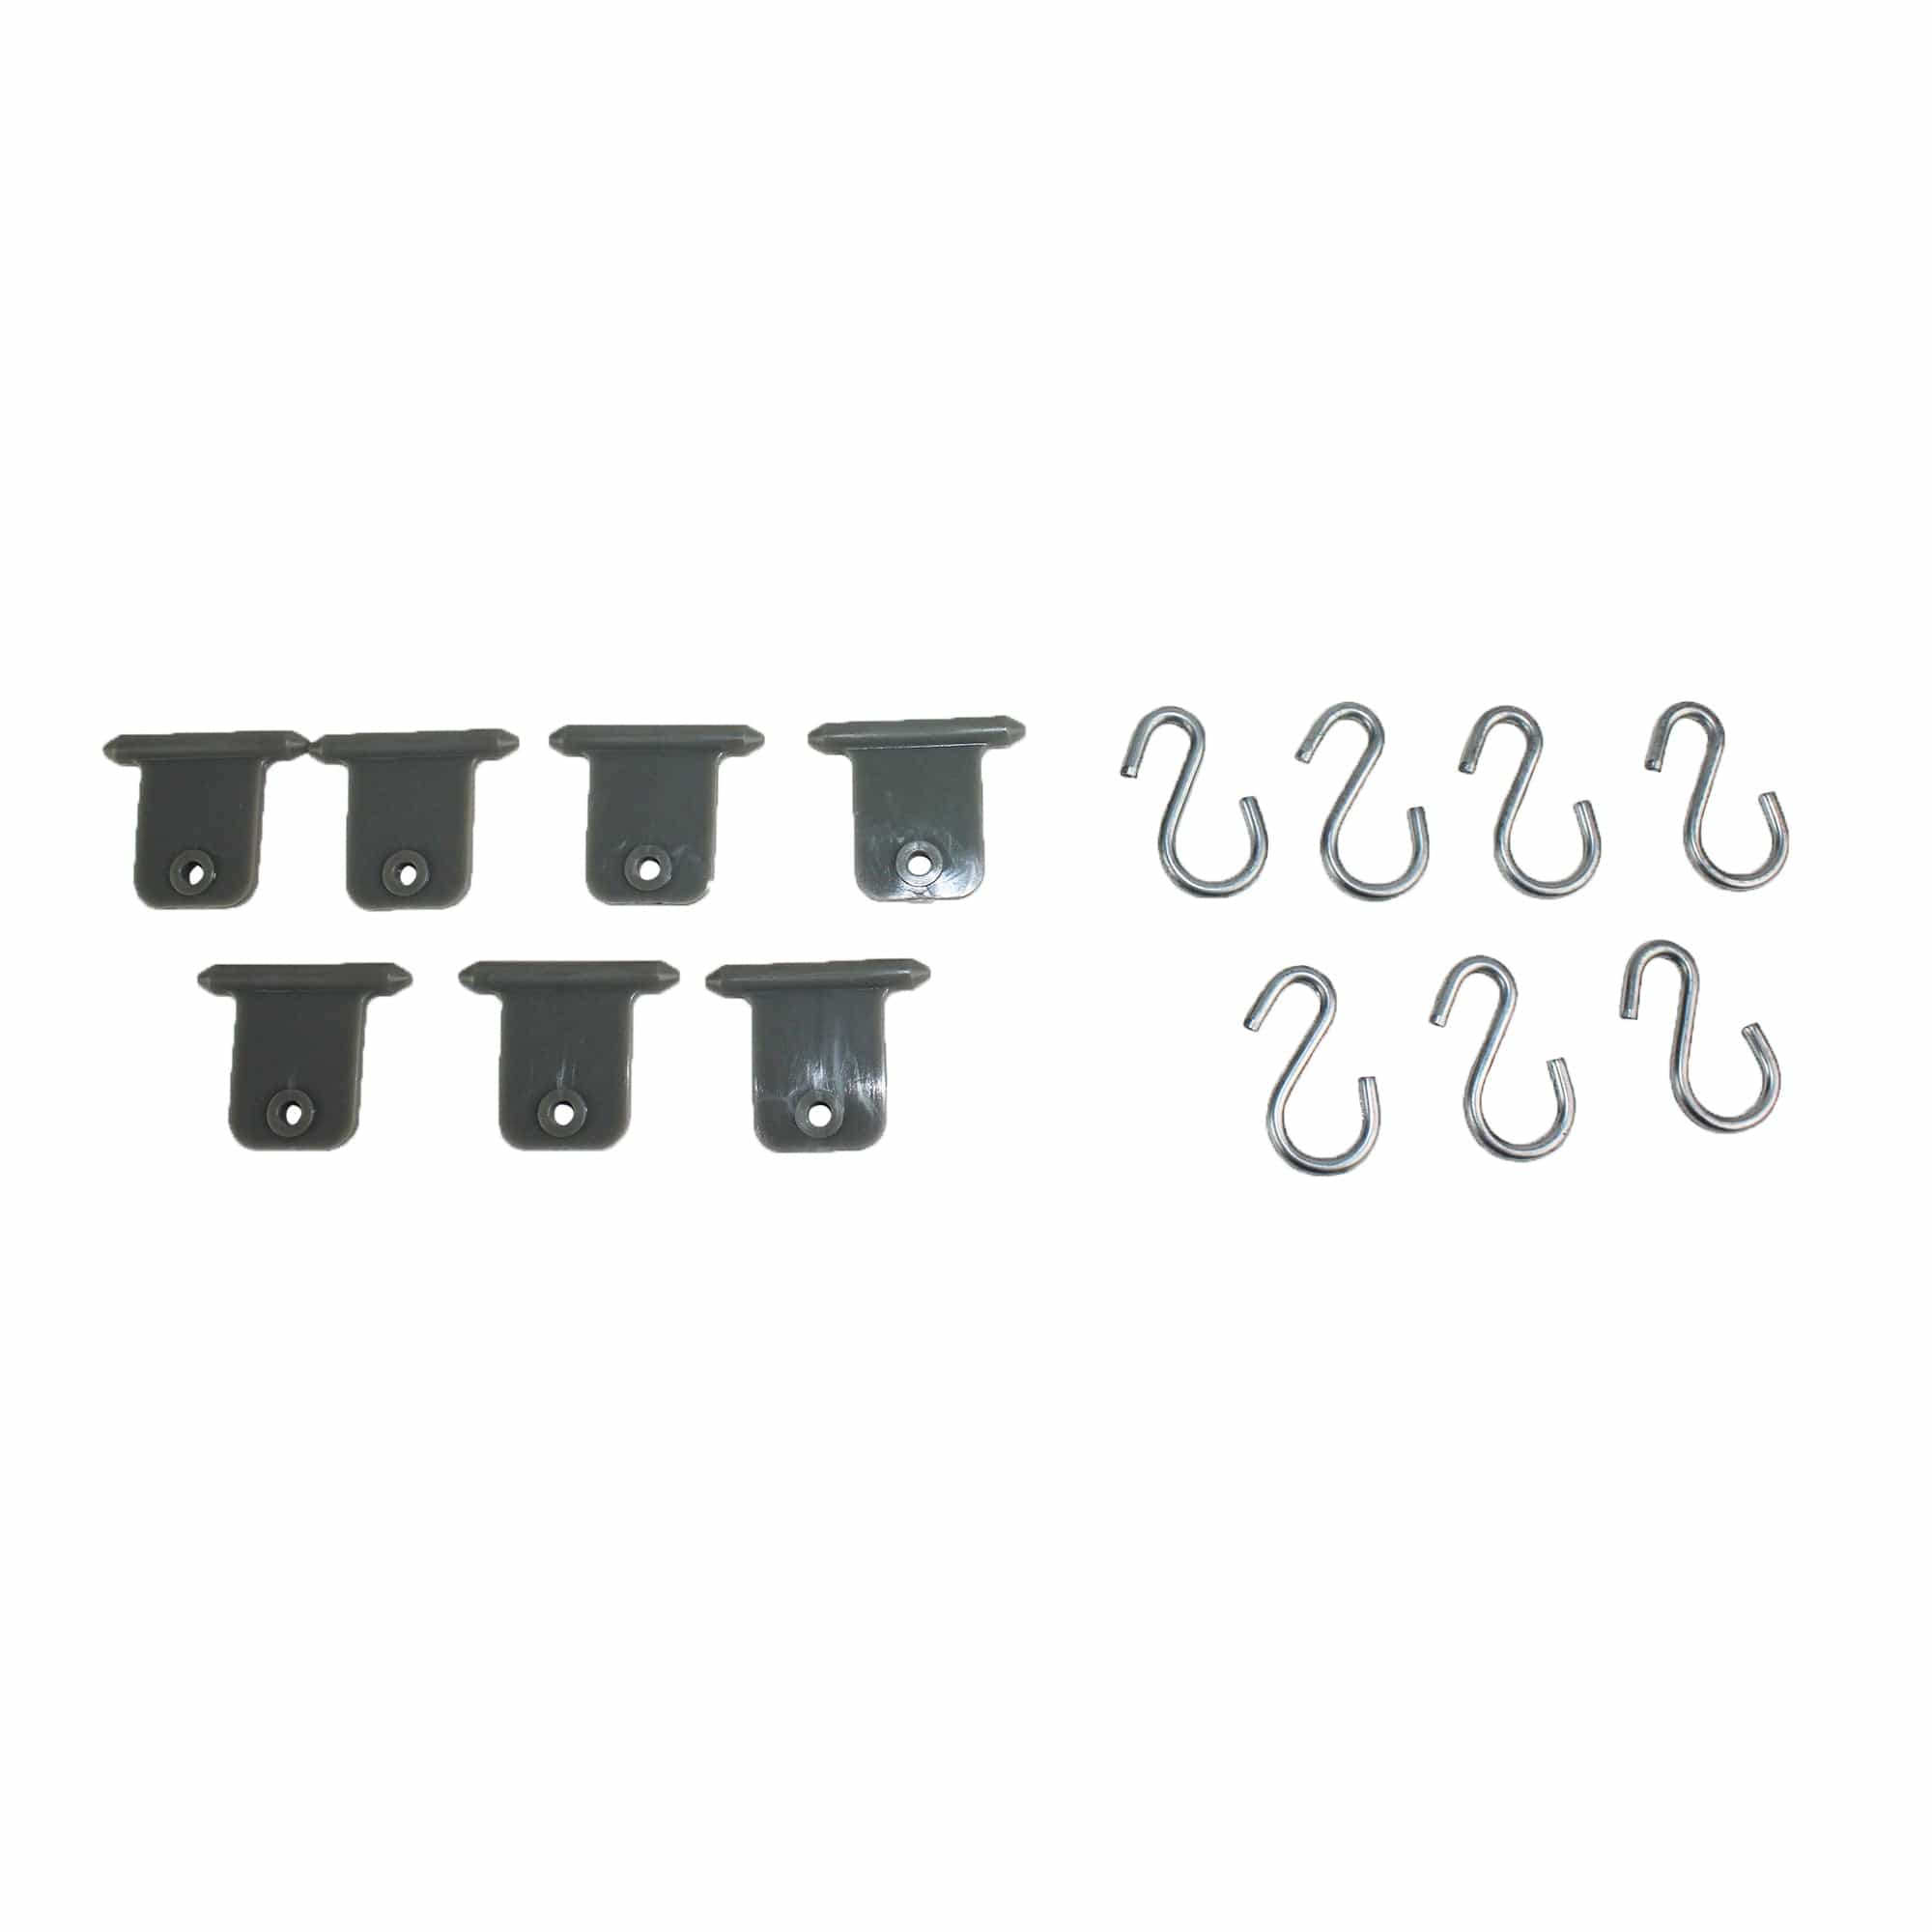 Dometic 930037 Awning Hangers